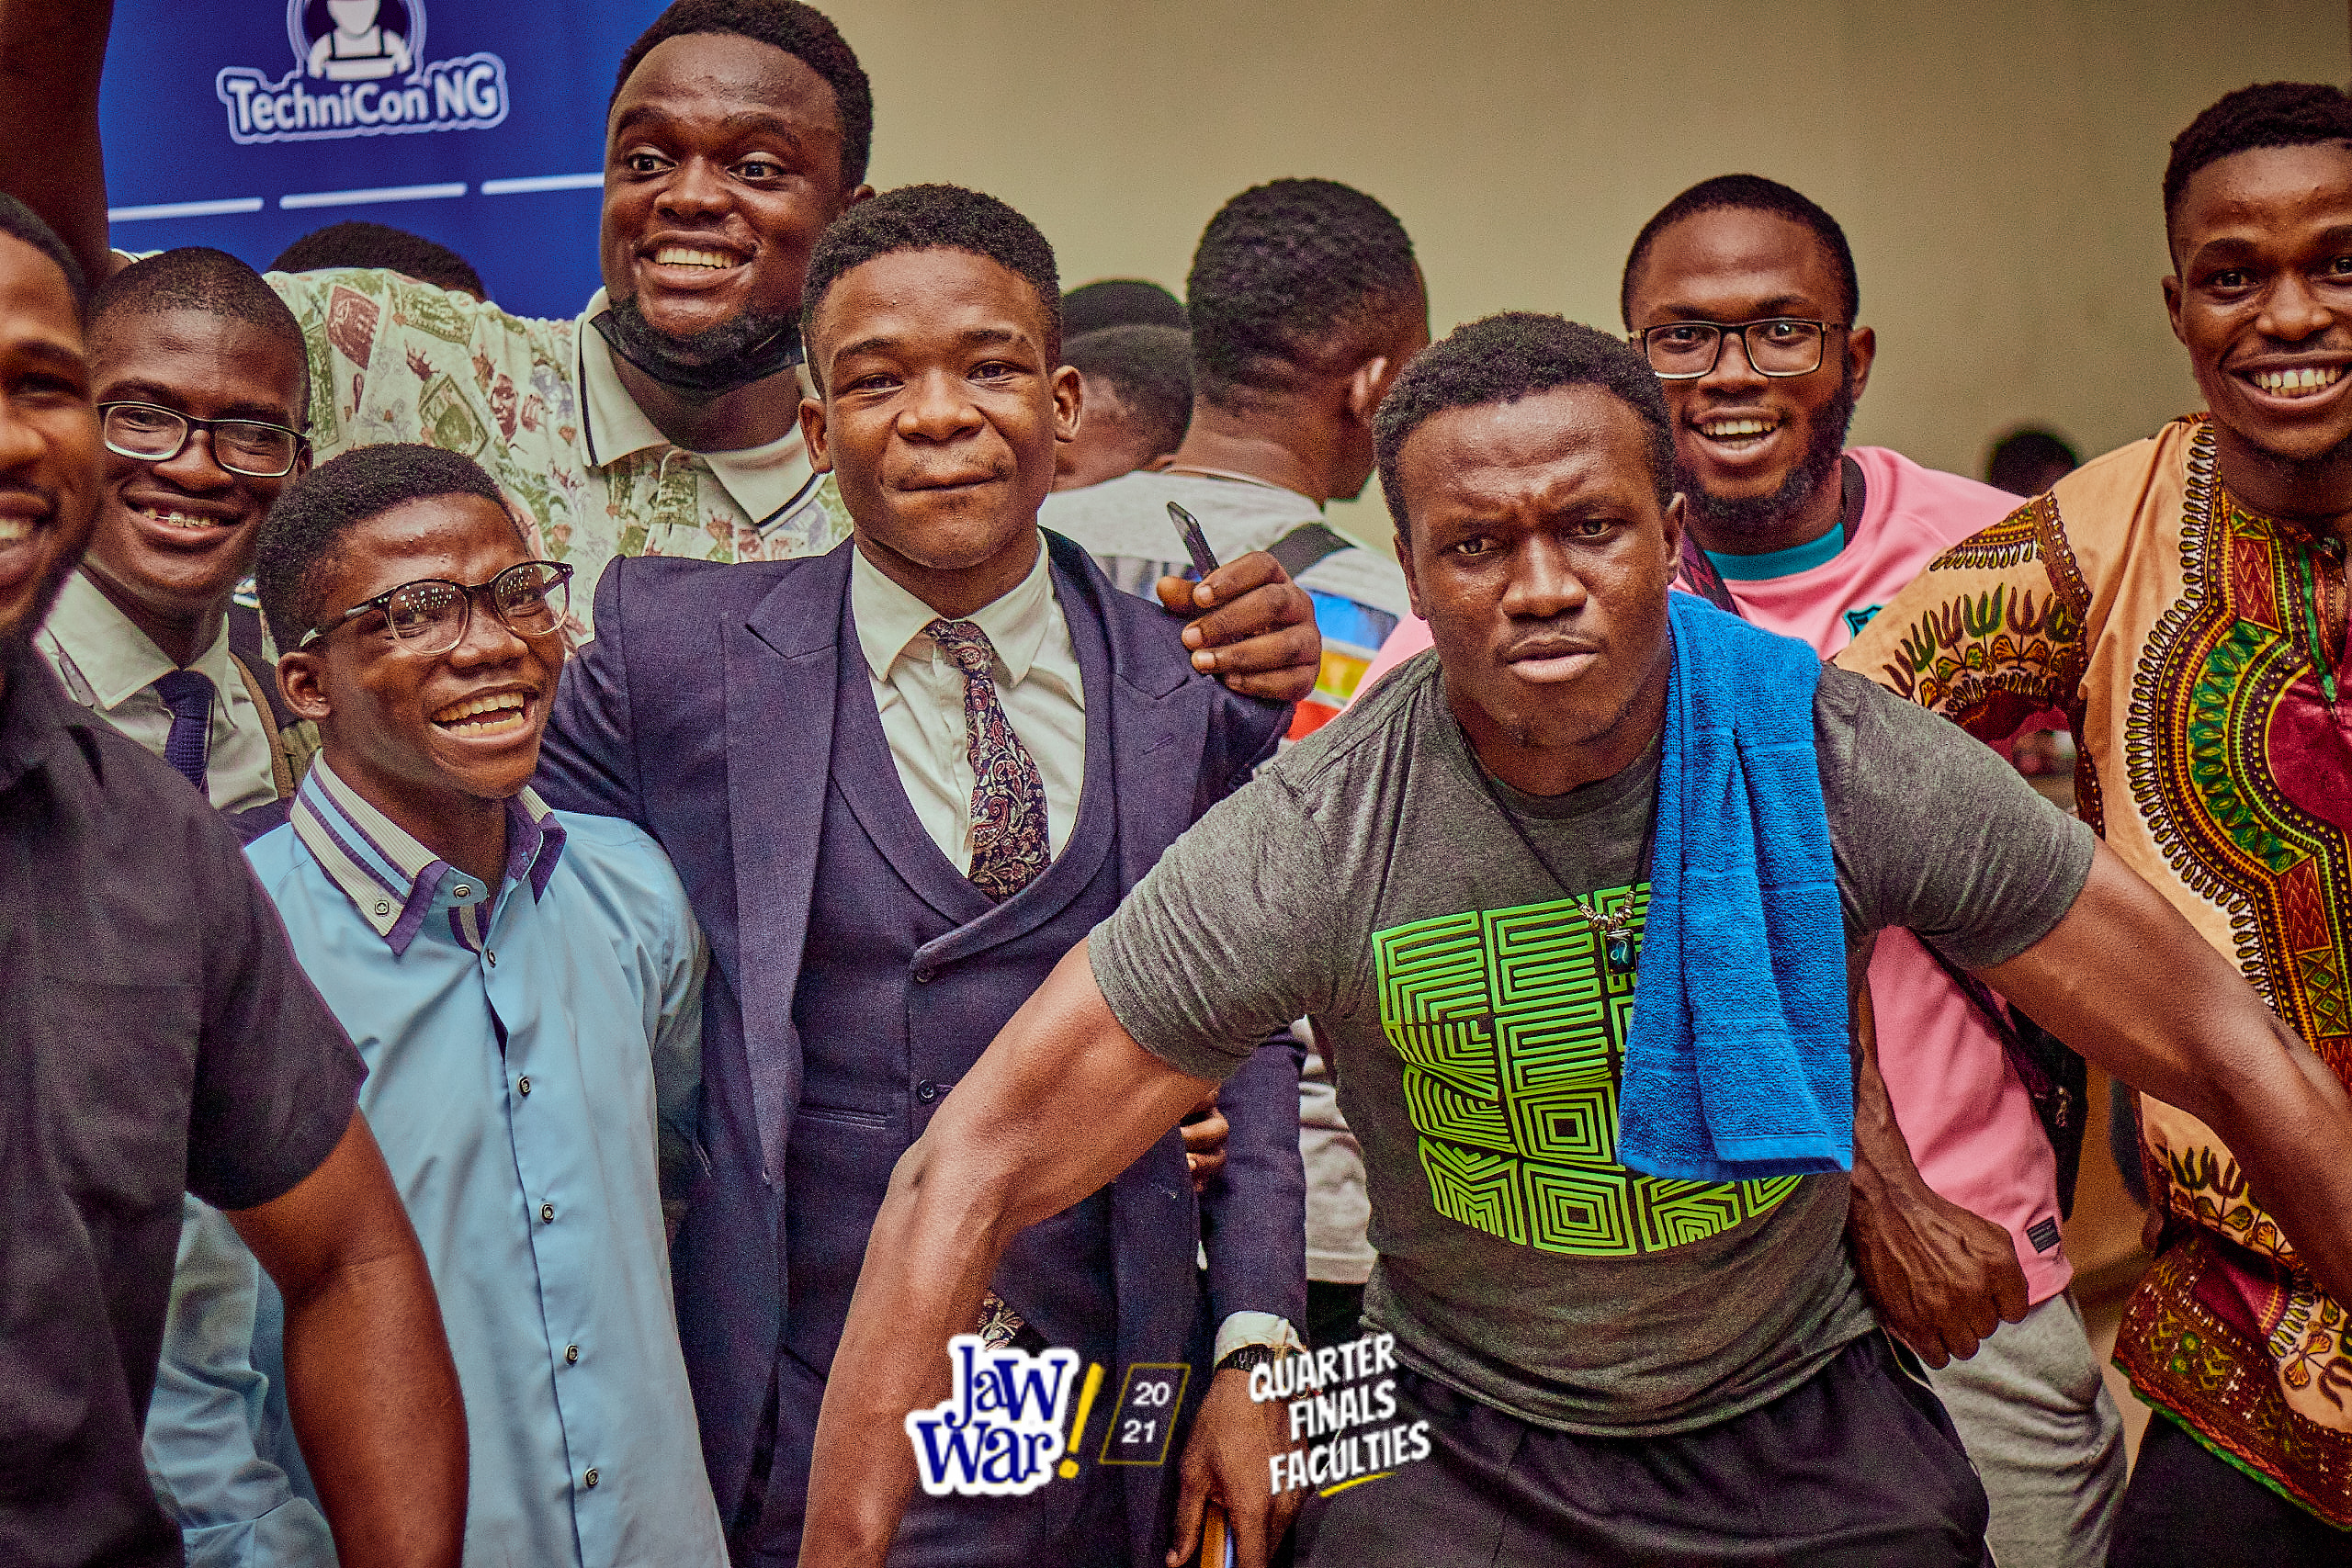 Brownites and their speaker, Dr. Olaoluwa Olorunfemi, "asserting dominance" after winning the Jaw War Quarter Finals in 2021